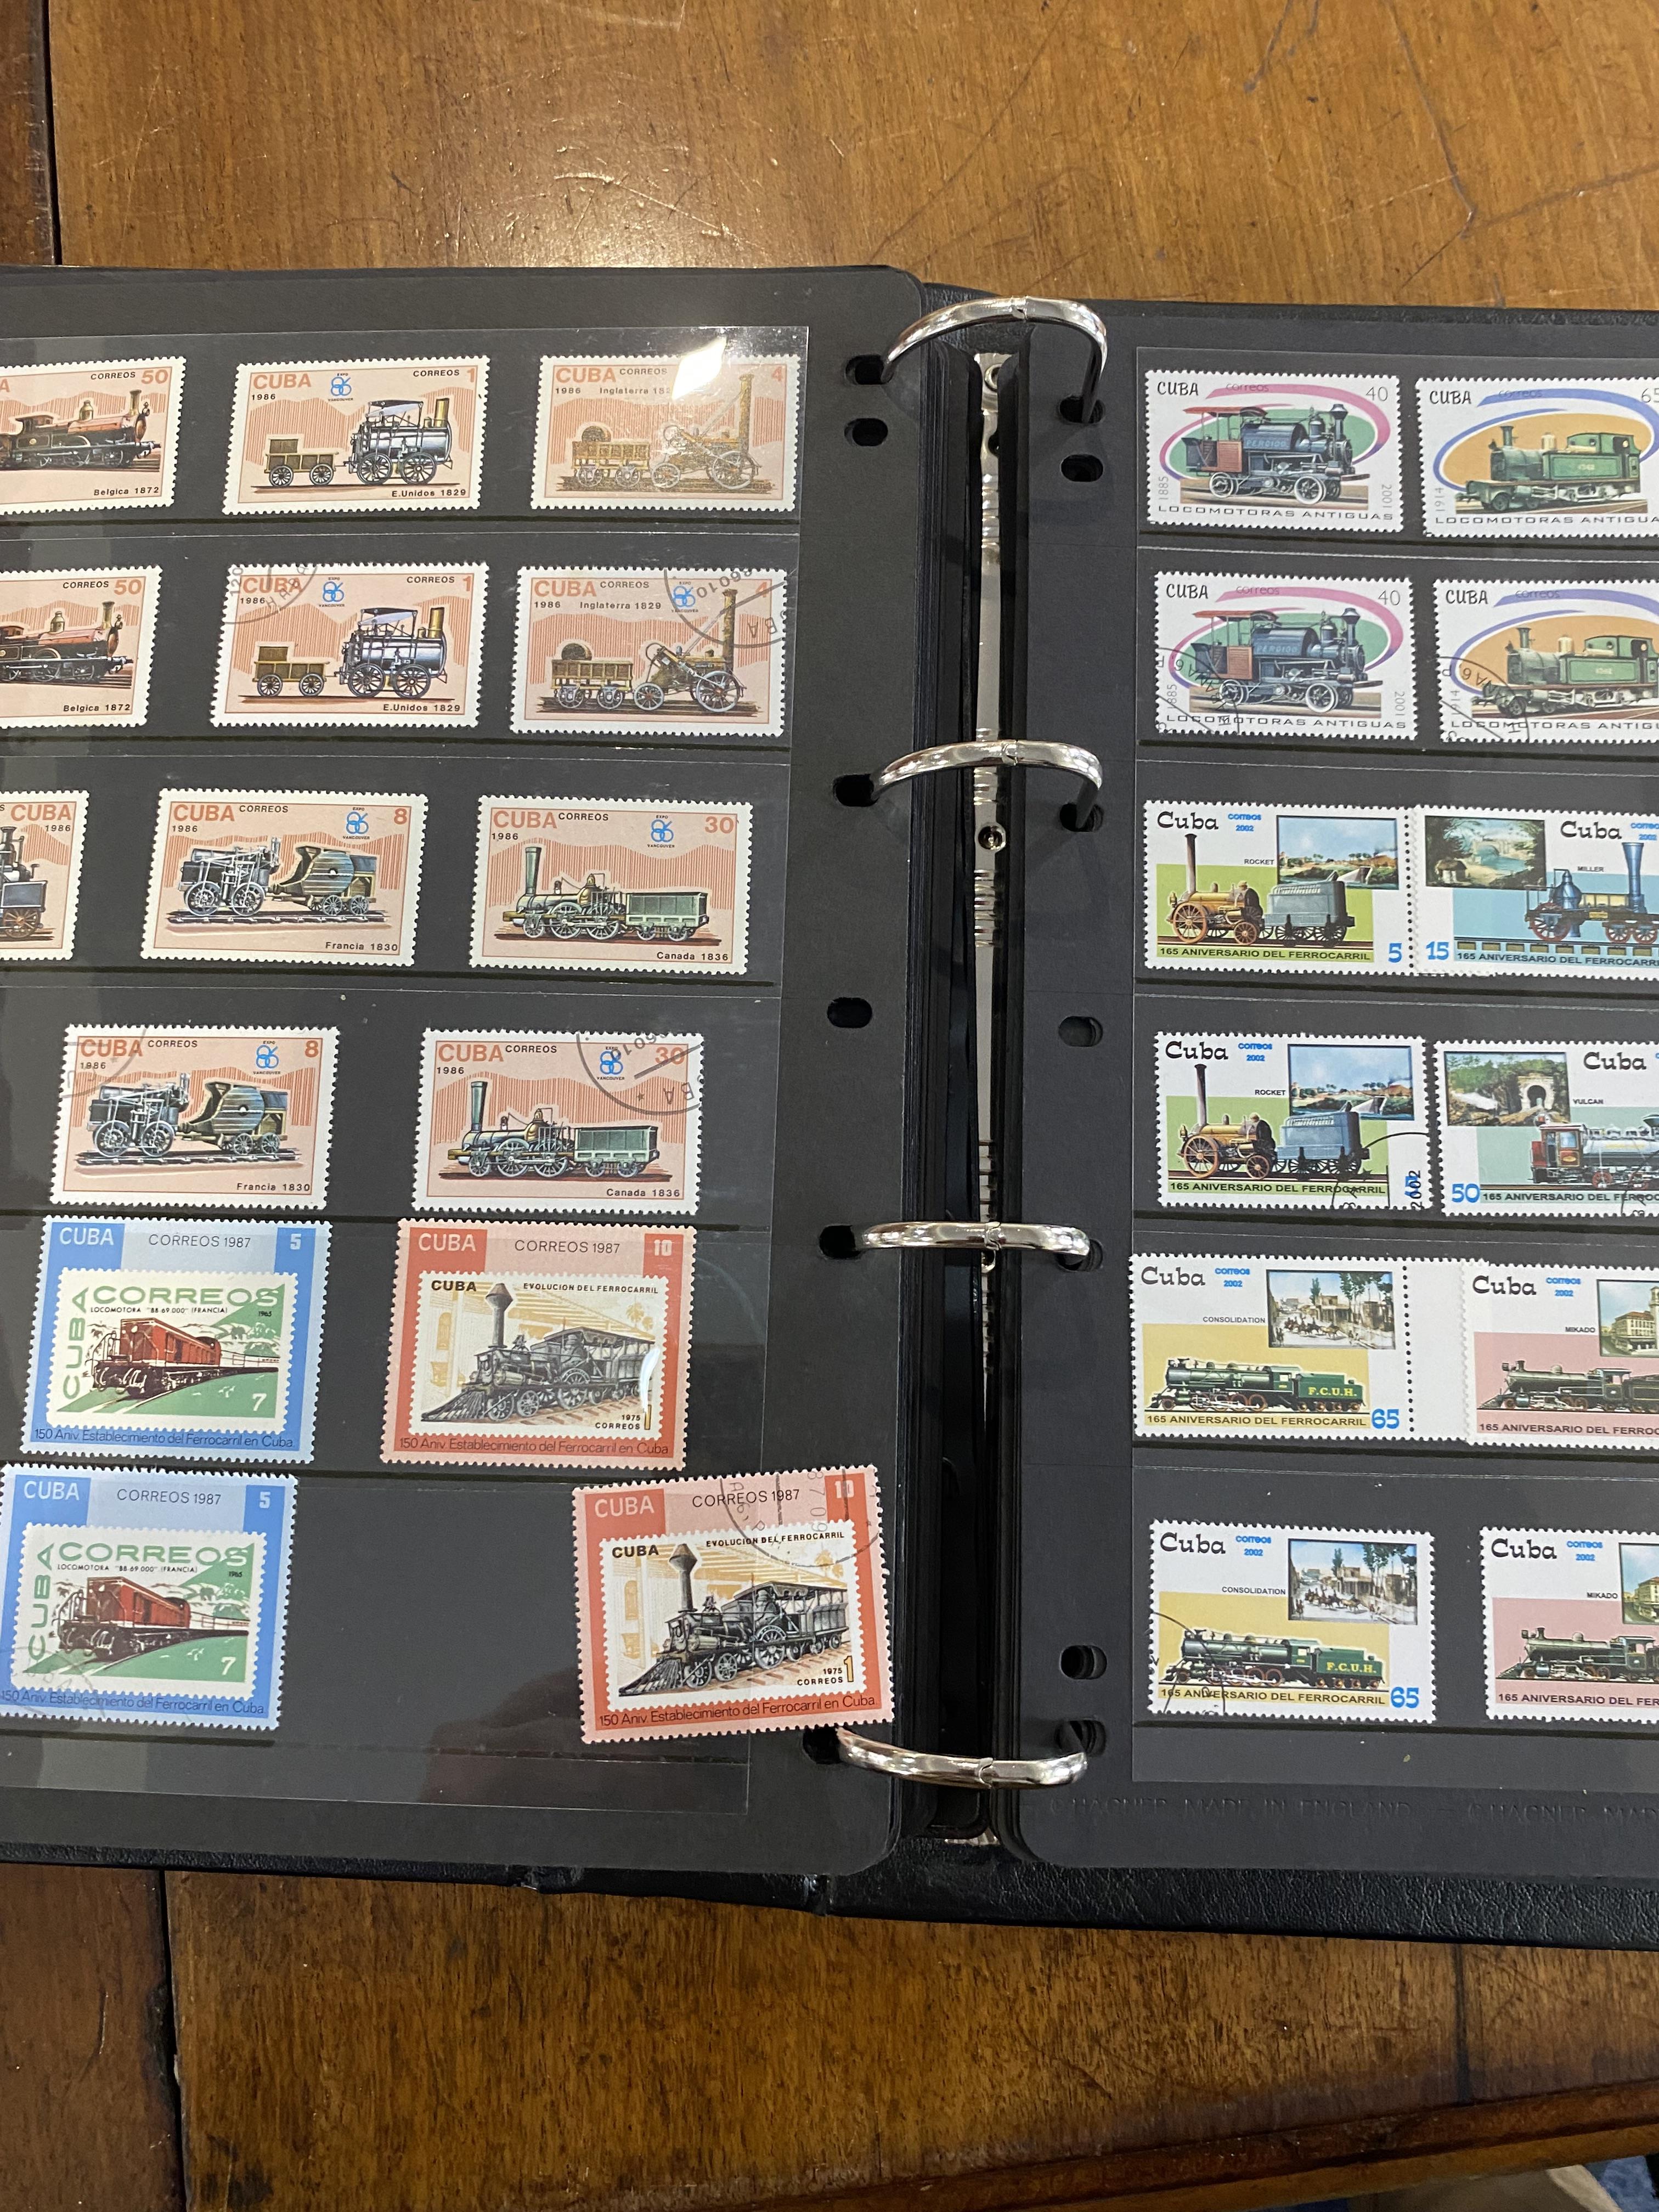 Stamp Interest - Meaty Album of Mostly Mint and railway oriented stamps from around the world. - Image 7 of 8